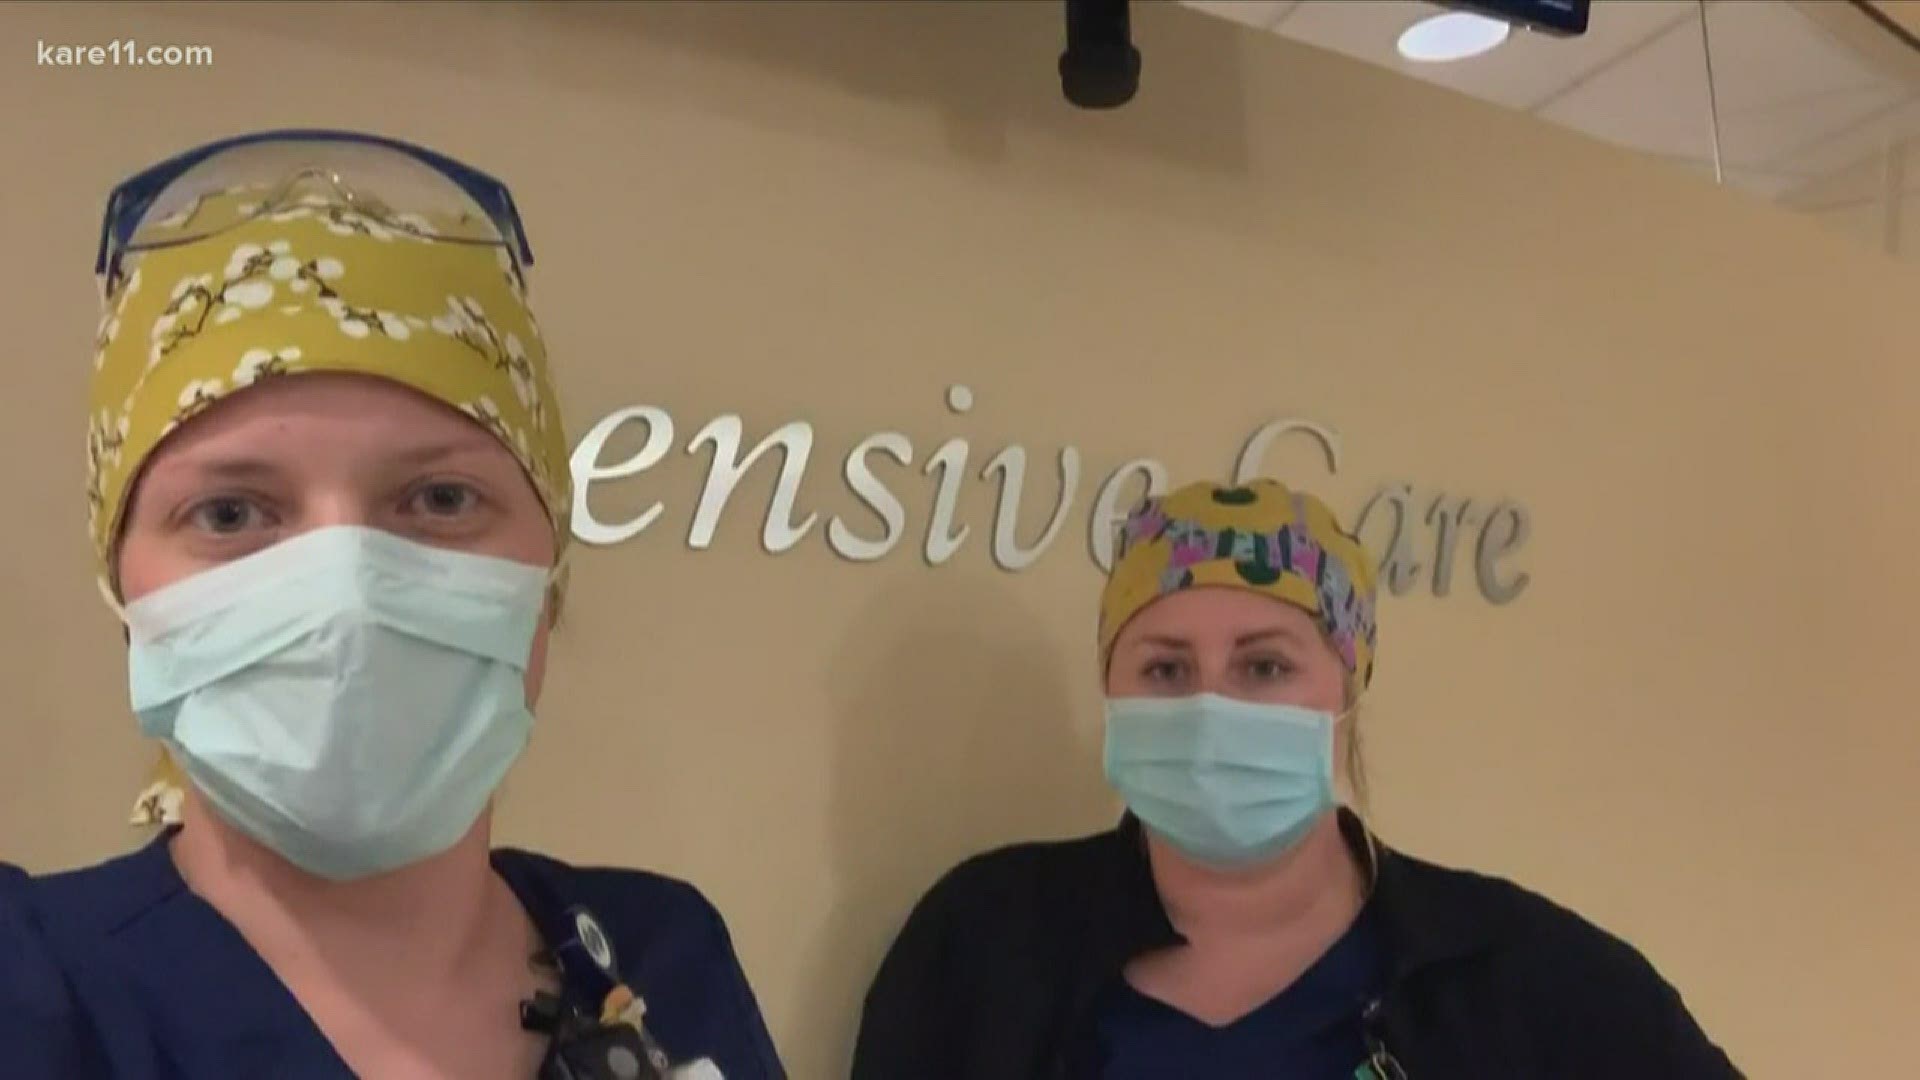 Two nurses at Regions Hospital give us an inside look at a day in their lives.